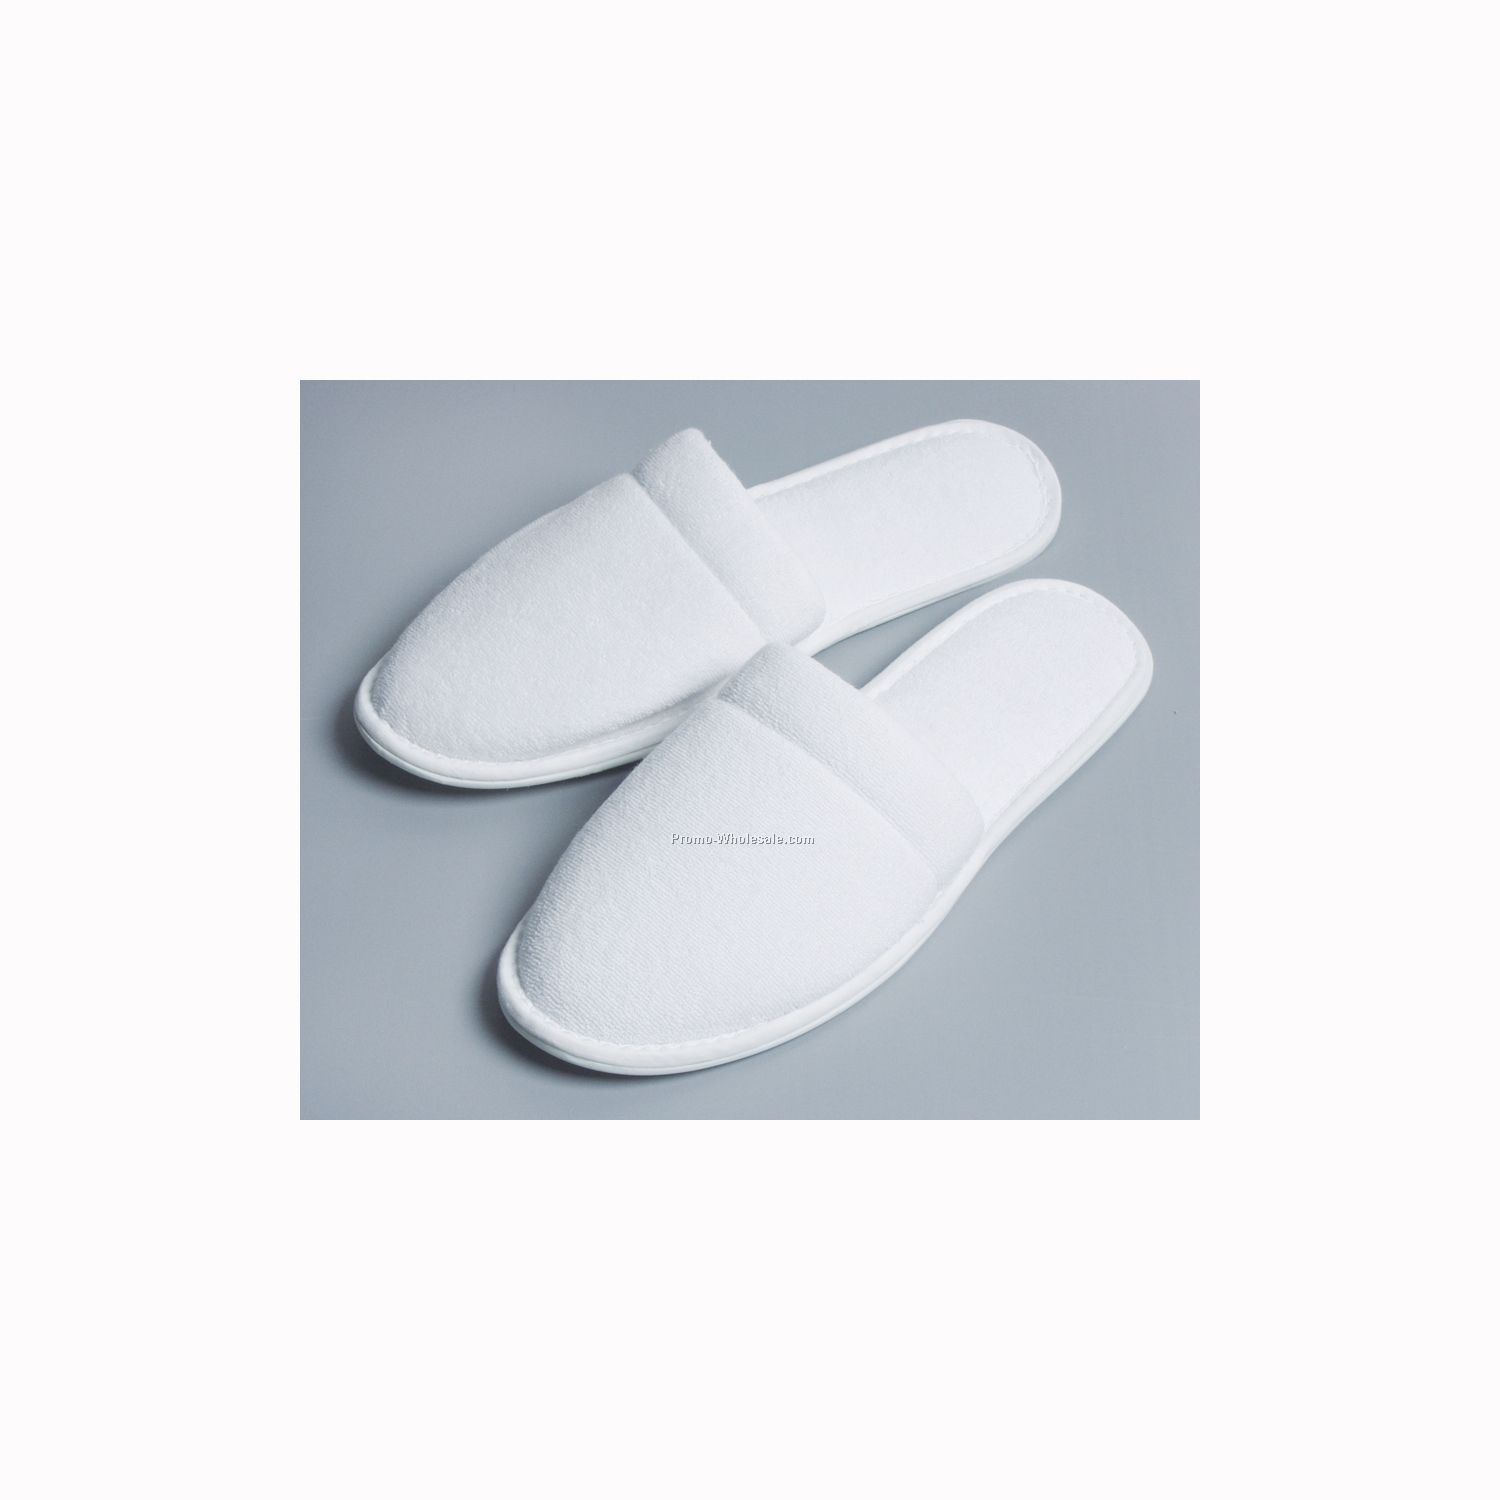 Embroidered Velour Terry Cloth Slipper Shoes